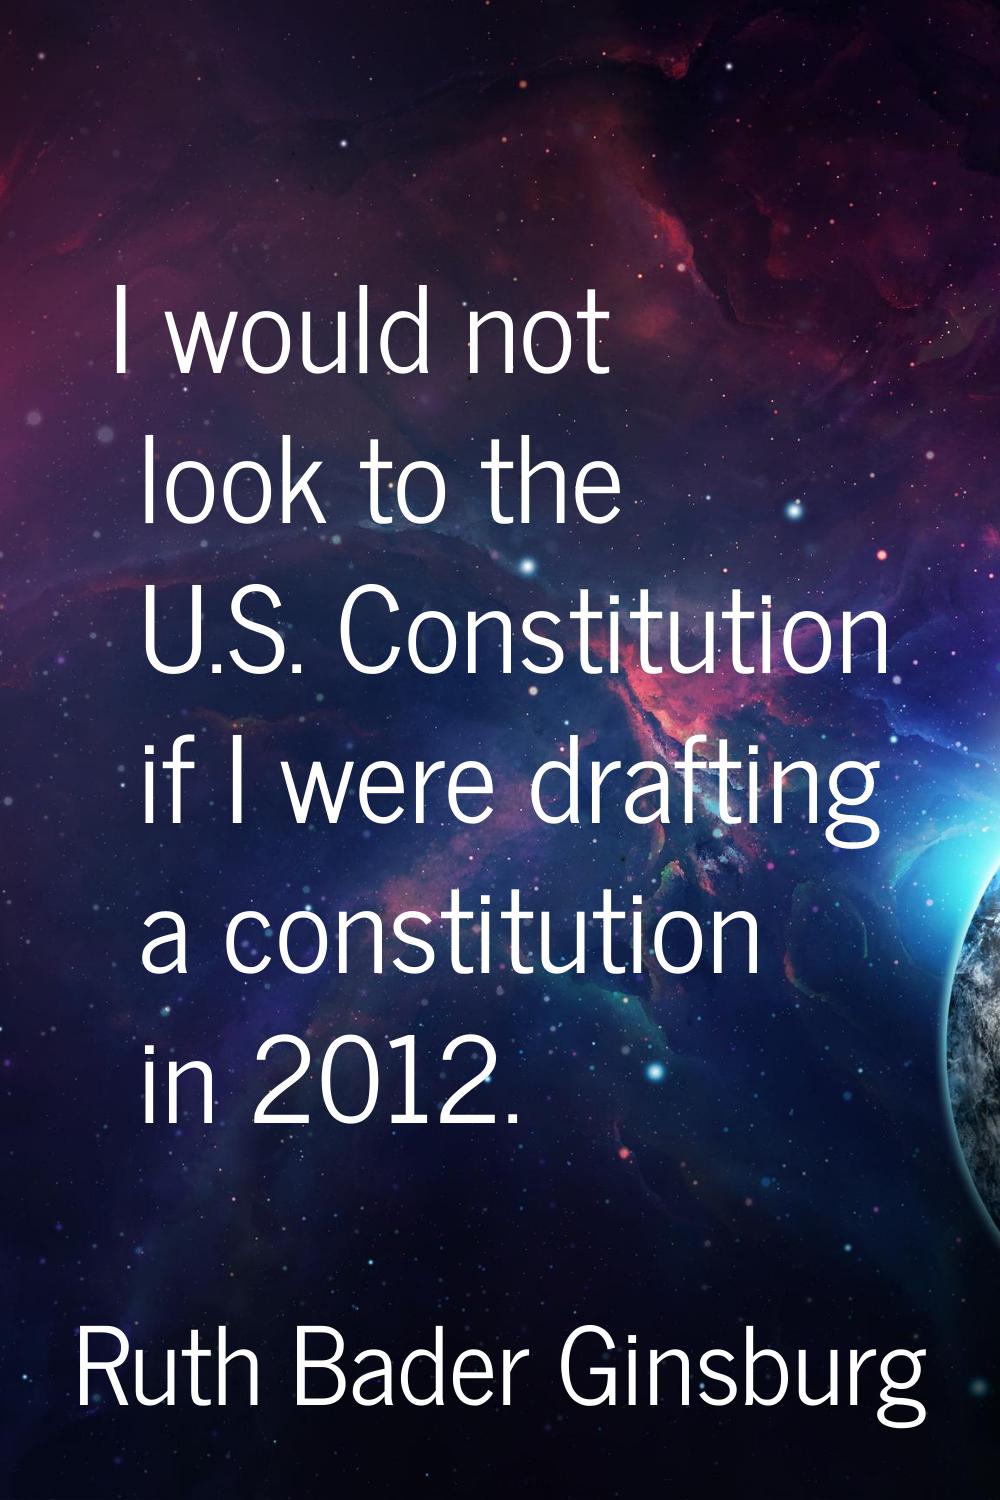 I would not look to the U.S. Constitution if I were drafting a constitution in 2012.